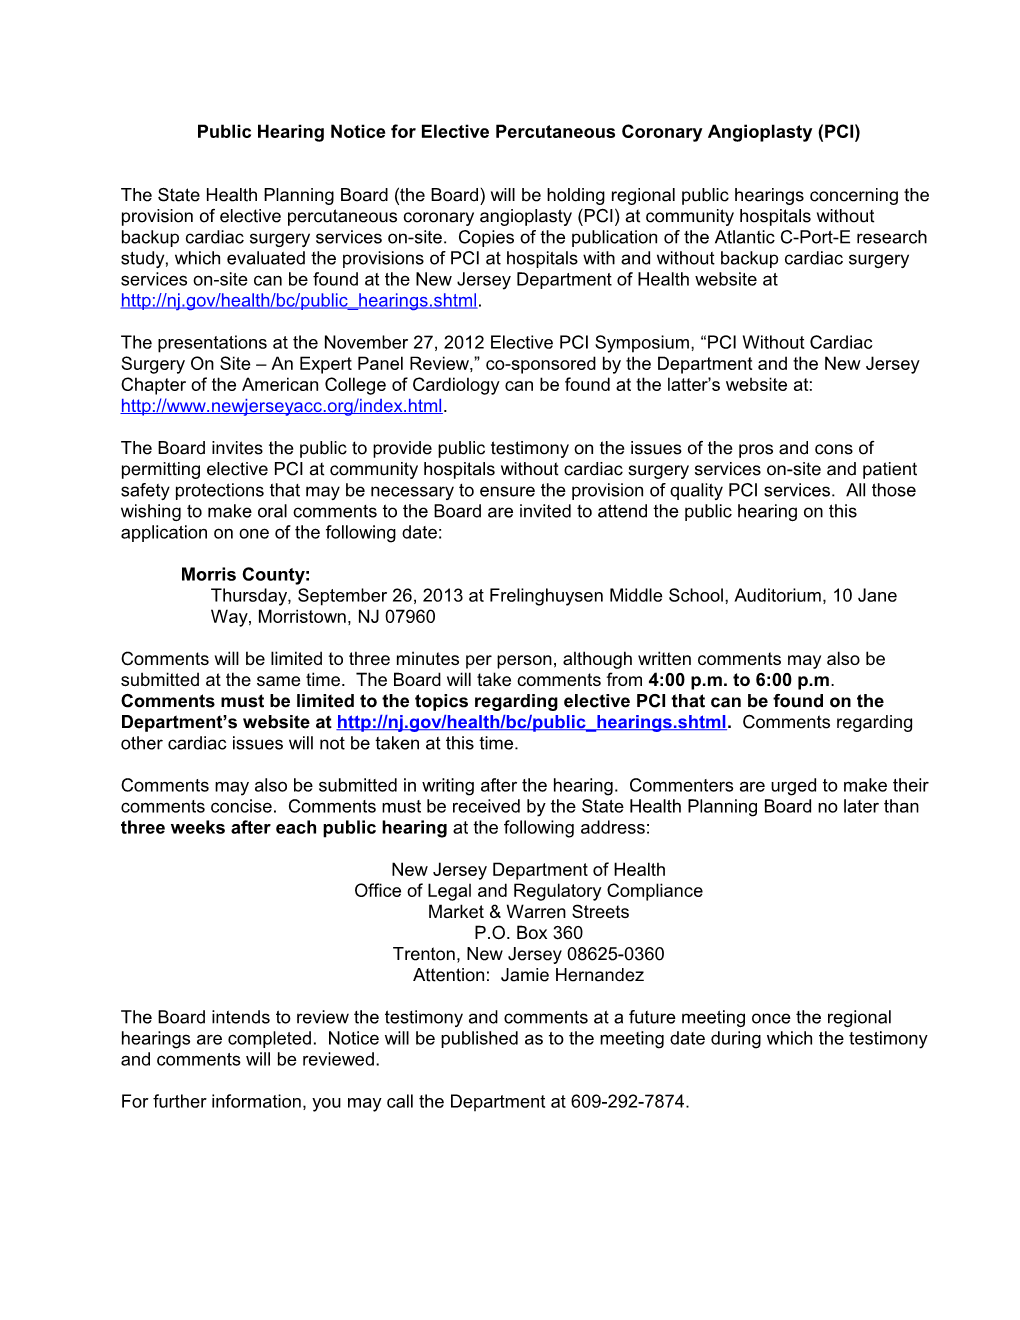 Public Hearing Notice for the Certificate of Need Application for the Closure of Inpatient